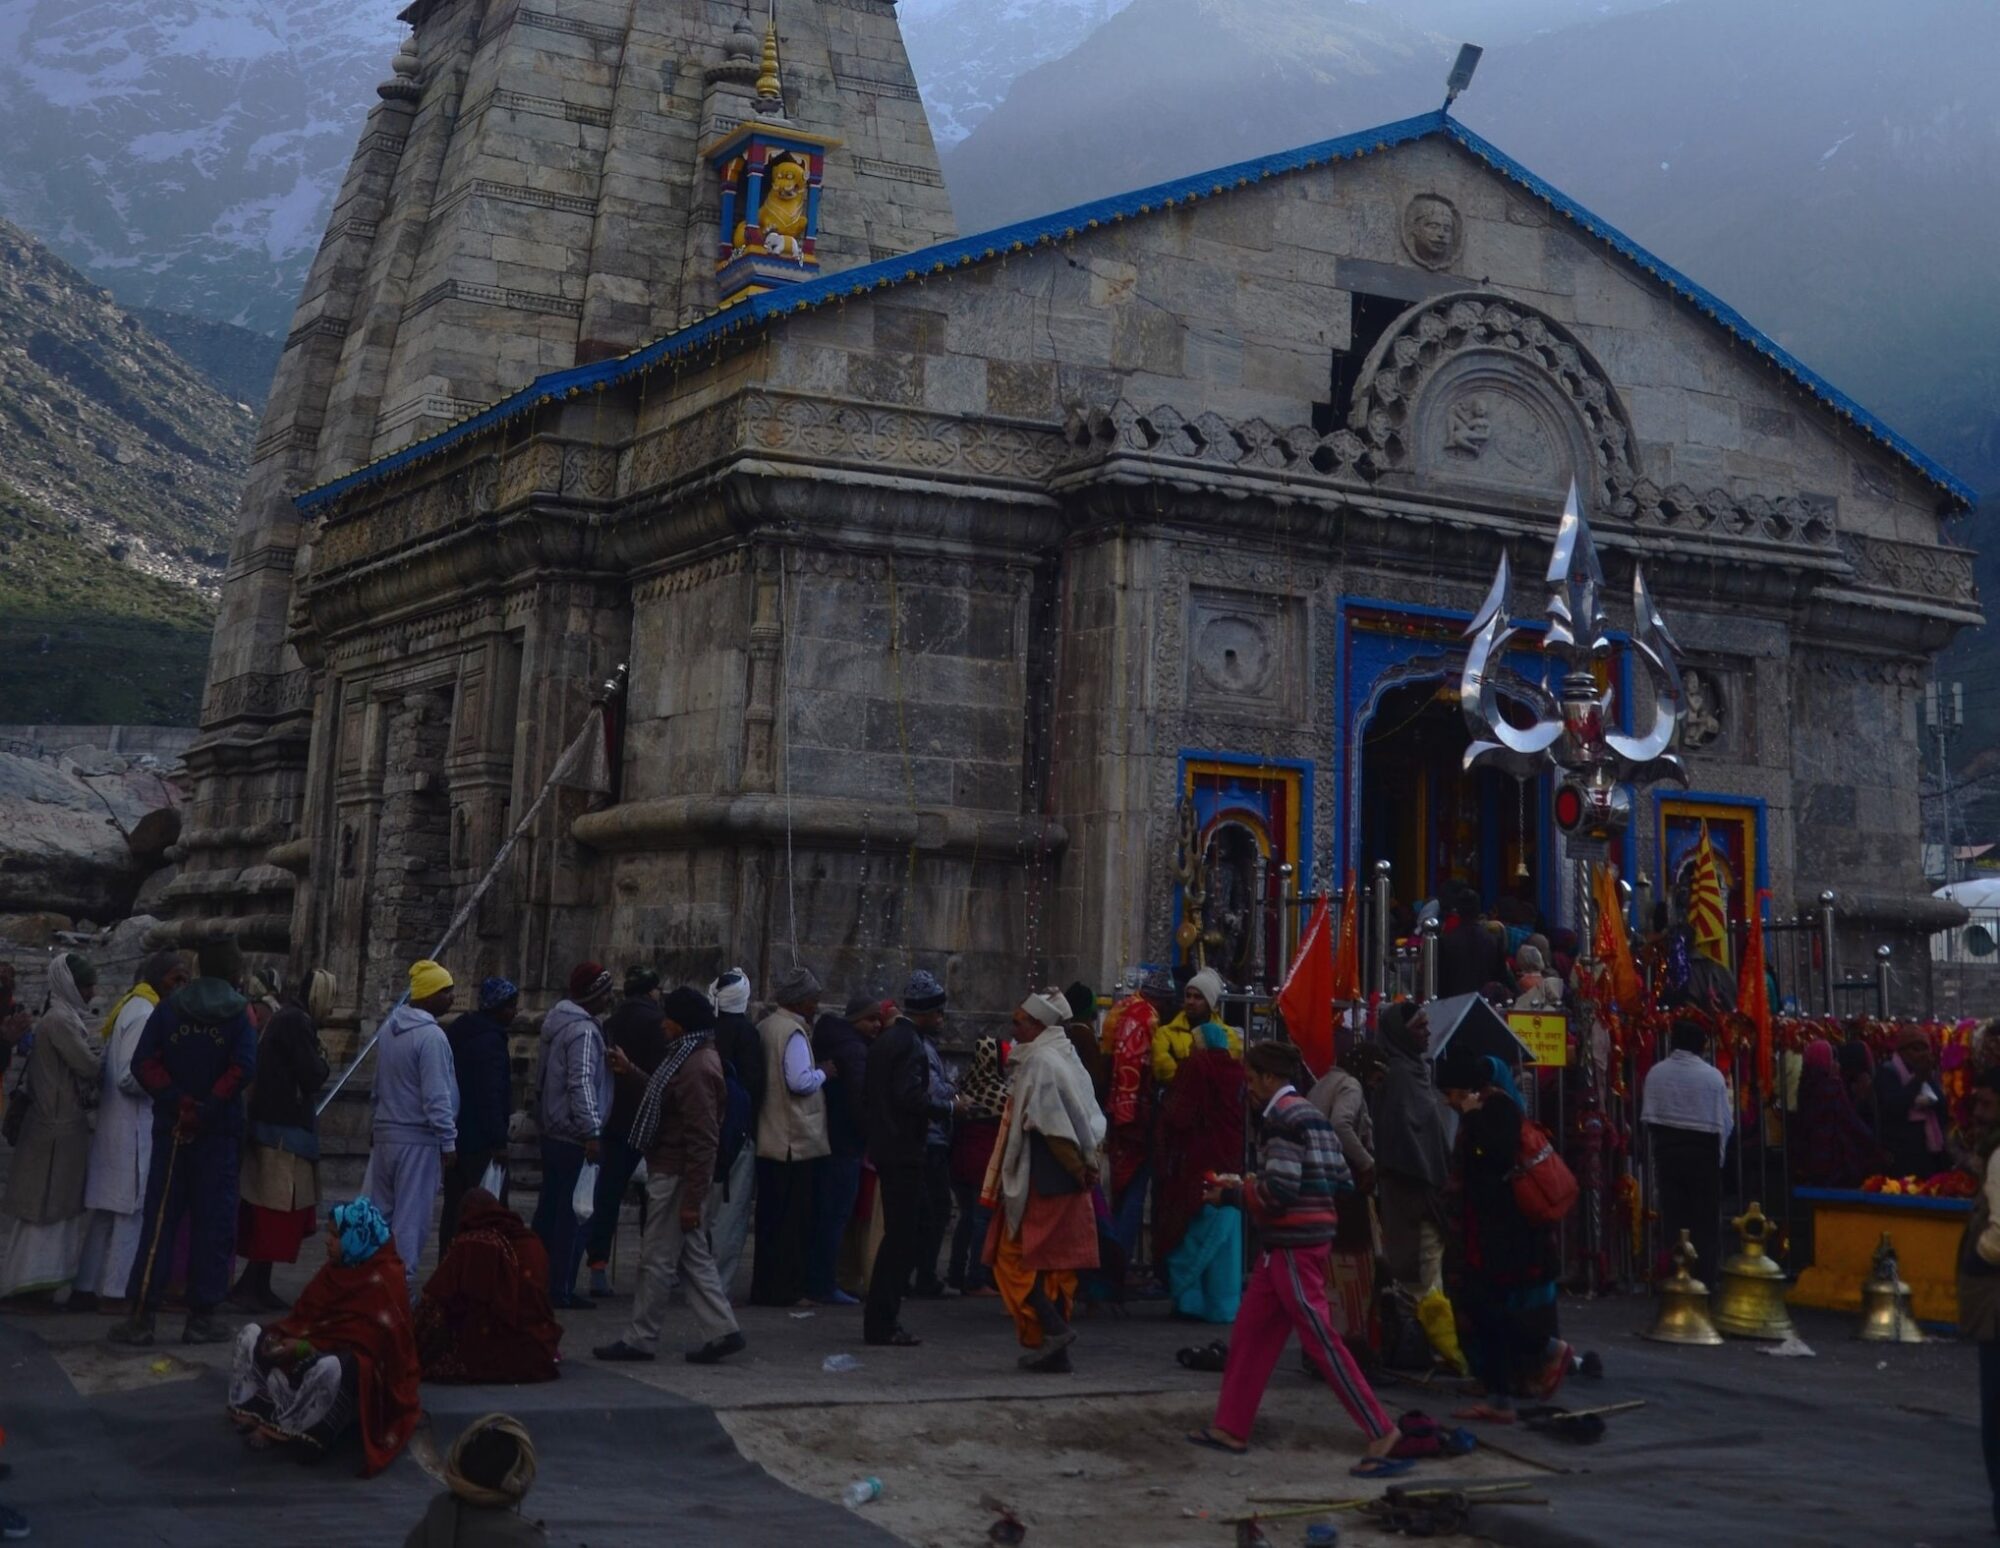 Chardham Yatra: An Experience of a Lifetime for Senior Citizens.